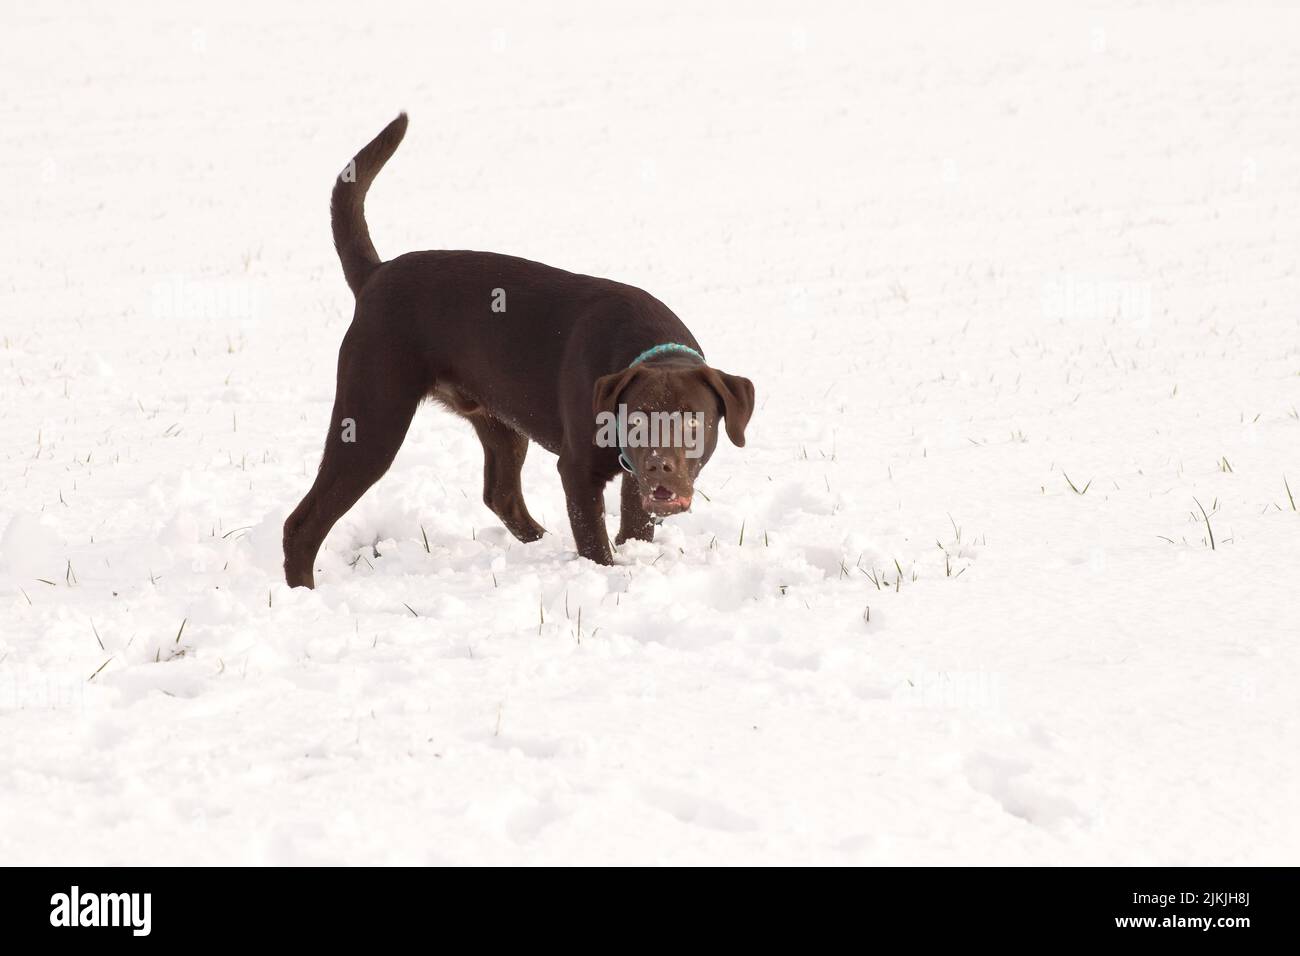 A brown lobrador dog walking in a snow-covered field Stock Photo